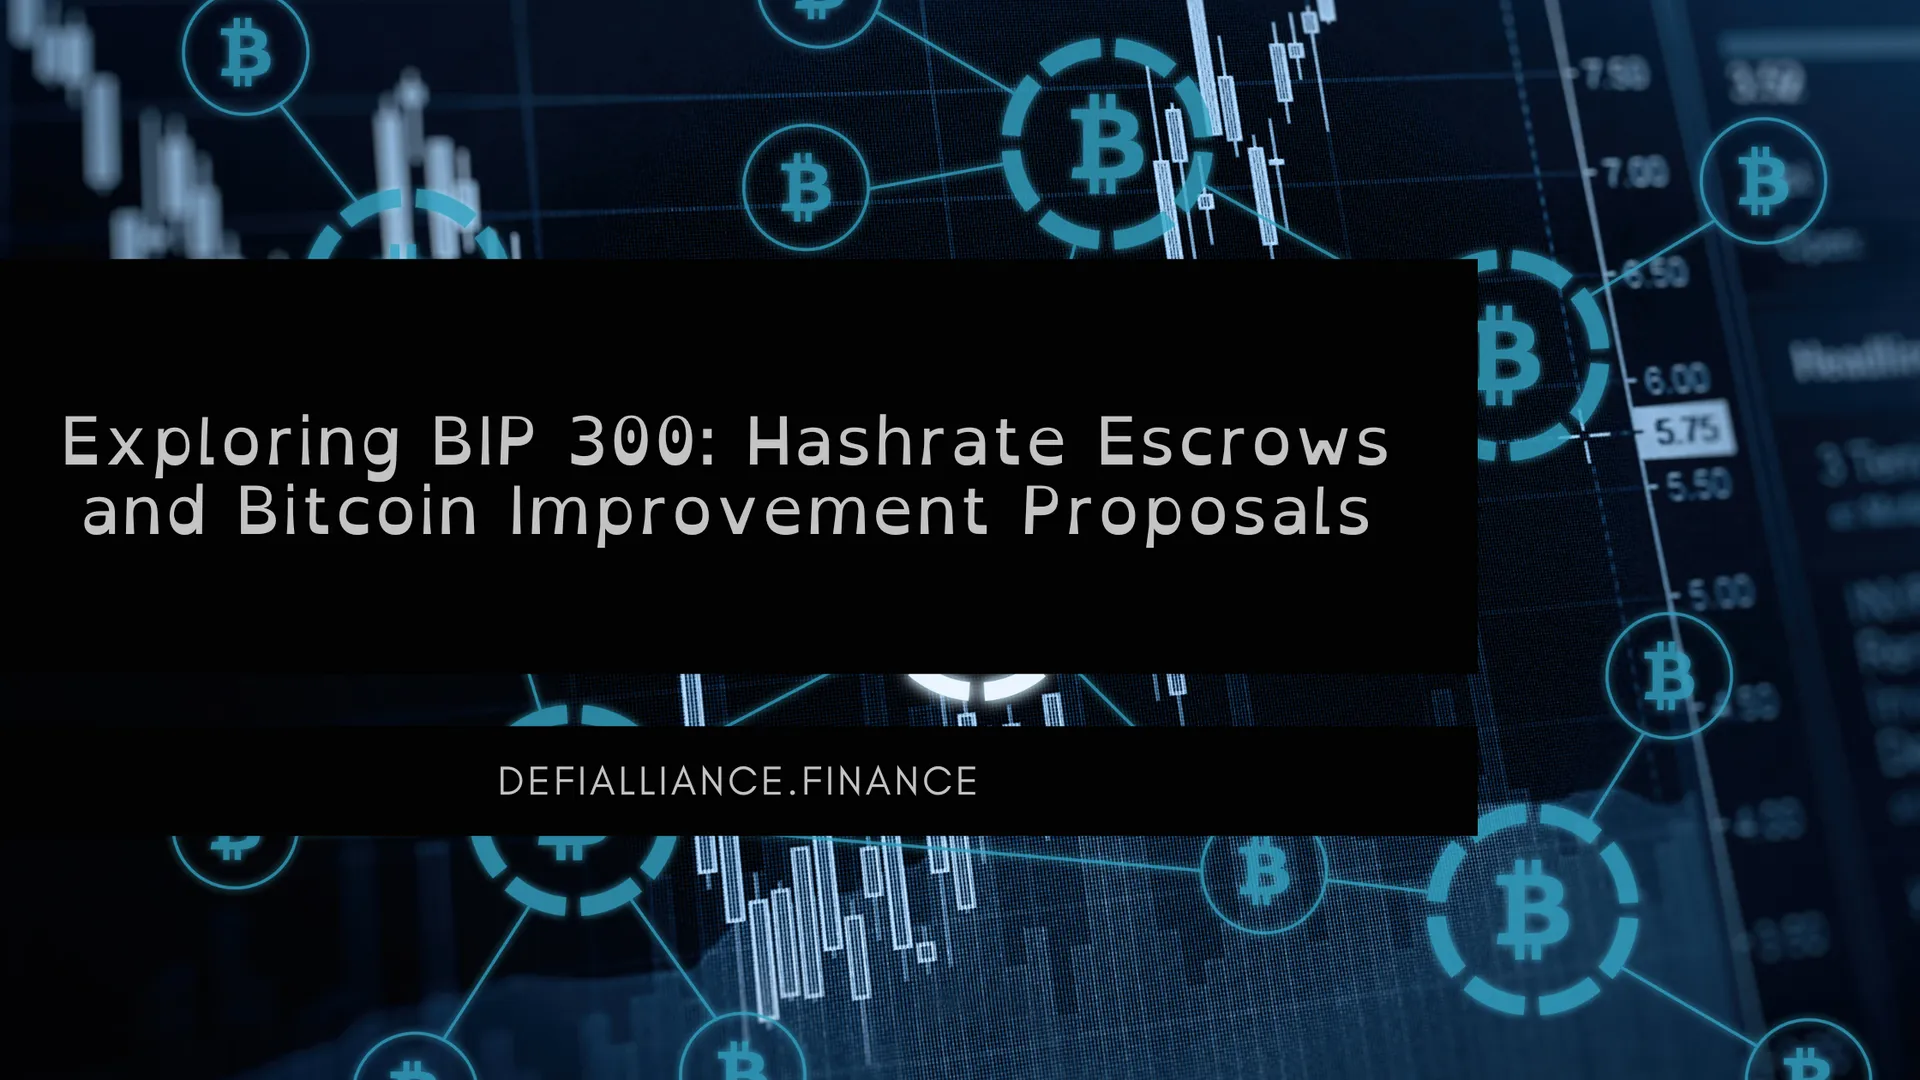 📢 Exciting New Blog Post Alert!

We're thrilled to present our latest blog post: "Exploring BIP 300: Hashrate Escrows and Bitcoin Improvement Proposals."

Dive into cryptocurrency innovation as we uncover the intricacies of Bitcoin Improvement Proposal 300 (BIP 300) and its revolutionary concept of Hashrate Escrows. Discover how this proposal is set to reshape the Bitcoin ecosystem and enhance transaction security through hash power.

🔗 Read the Full Article Here: Exploring BIP 300: Hashrate Escrows and Bitcoin Improvement Proposals blog.defialliance.finance/exploring-bip-300-hashrate-escrows-and-bitcoin-improvement-proposals-56f9fcd03c28

Explore the motivations, key components, and benefits of BIP 300, and learn how it opens the door to secure, auditable transactions using innovative sidechain technology.